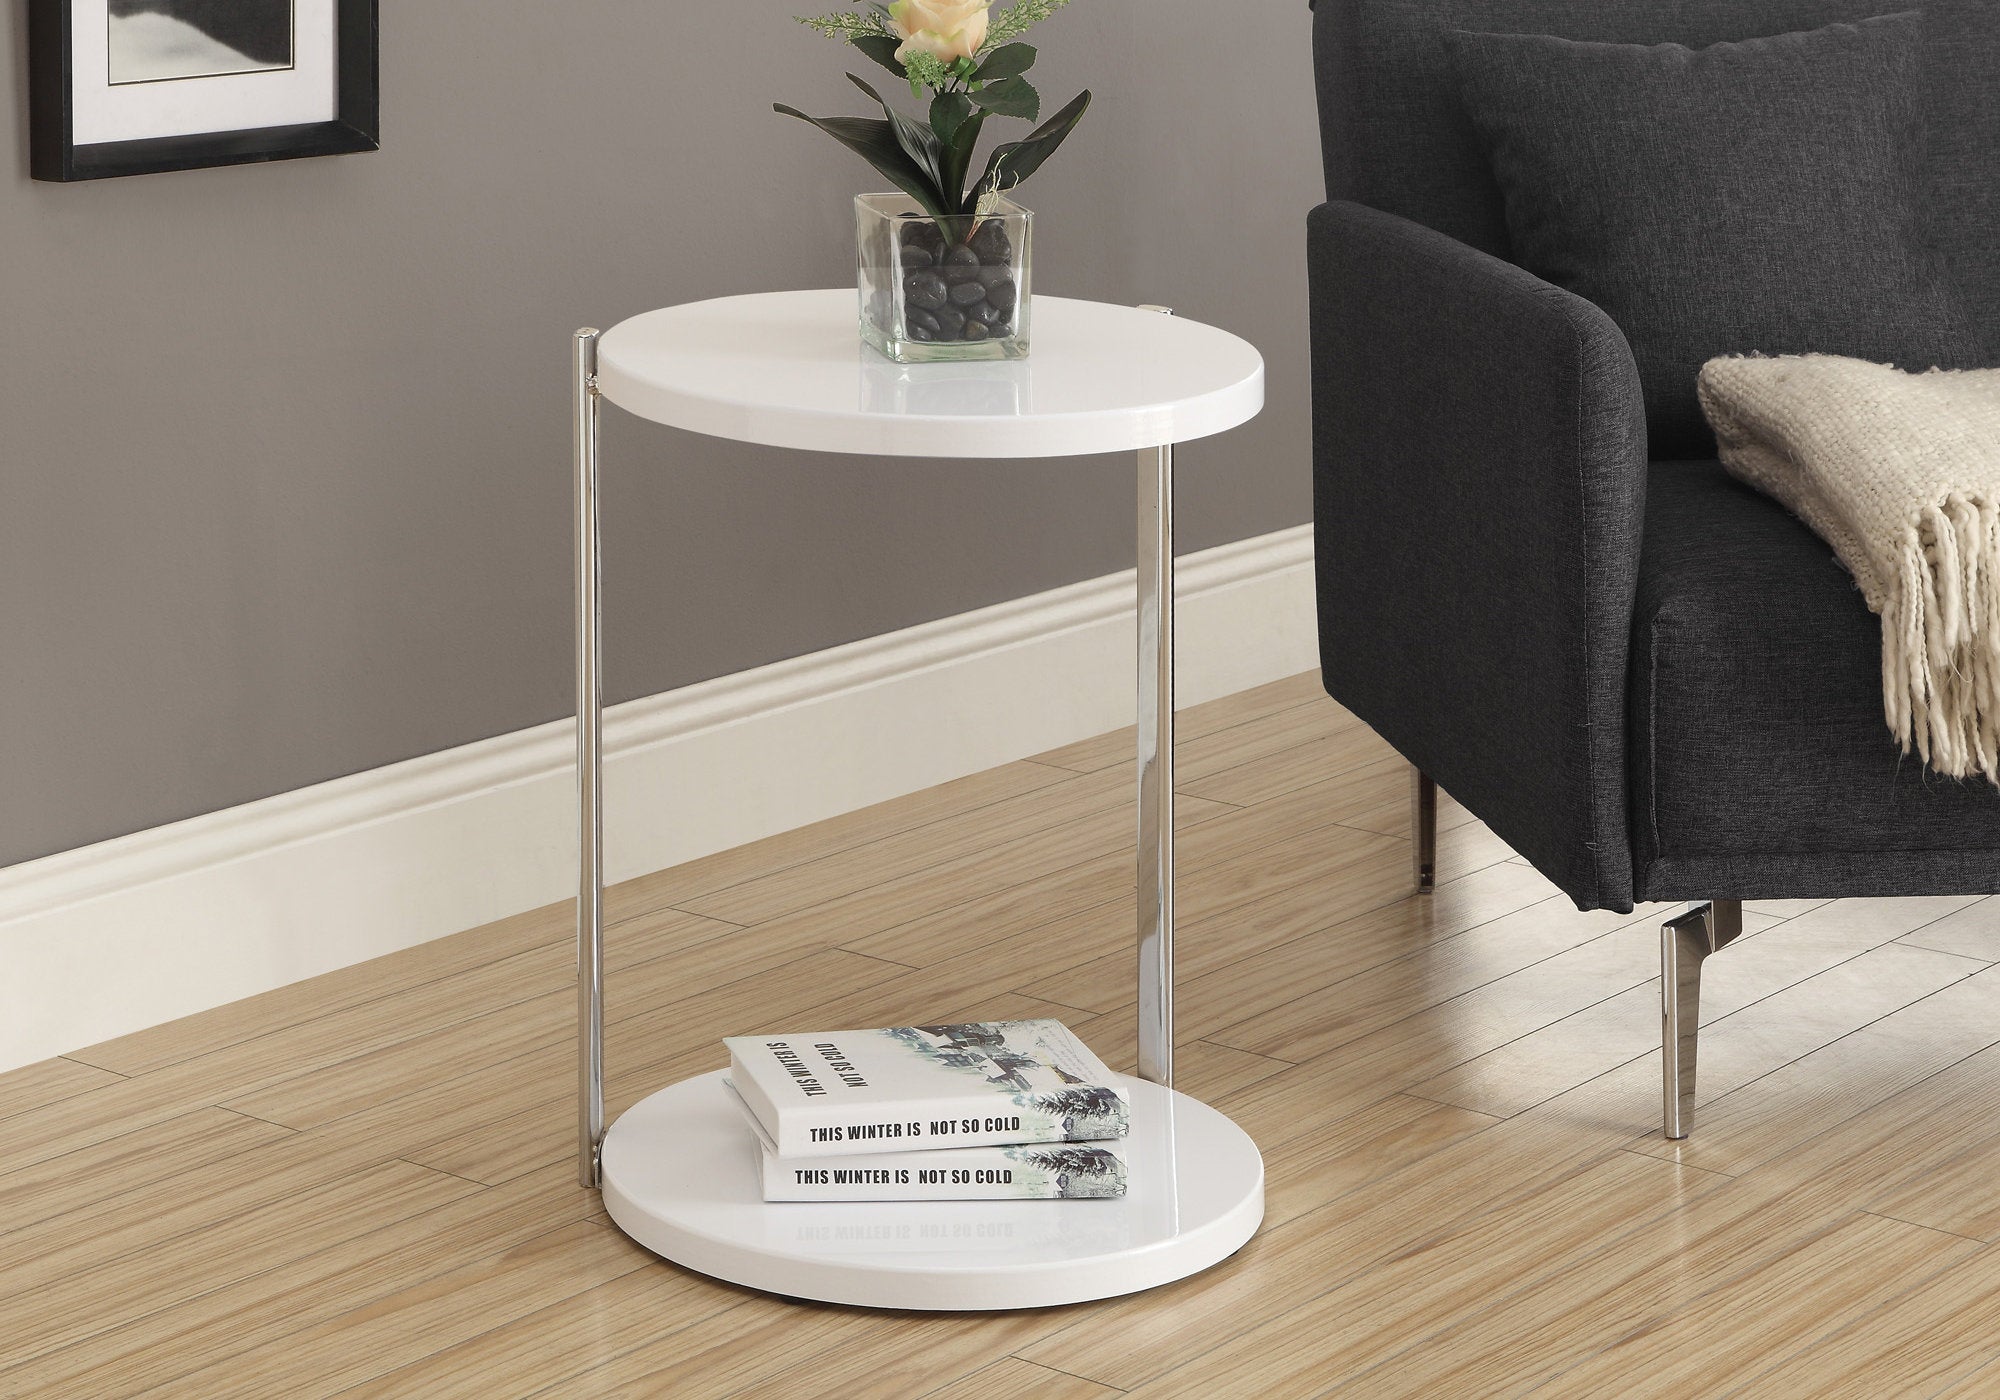 MN-963056    Accent Table, Side, End, Nightstand, Lamp, Living Room, Bedroom, Metal Base, Laminate, Glossy White, Chrome, Contemporary, Modern